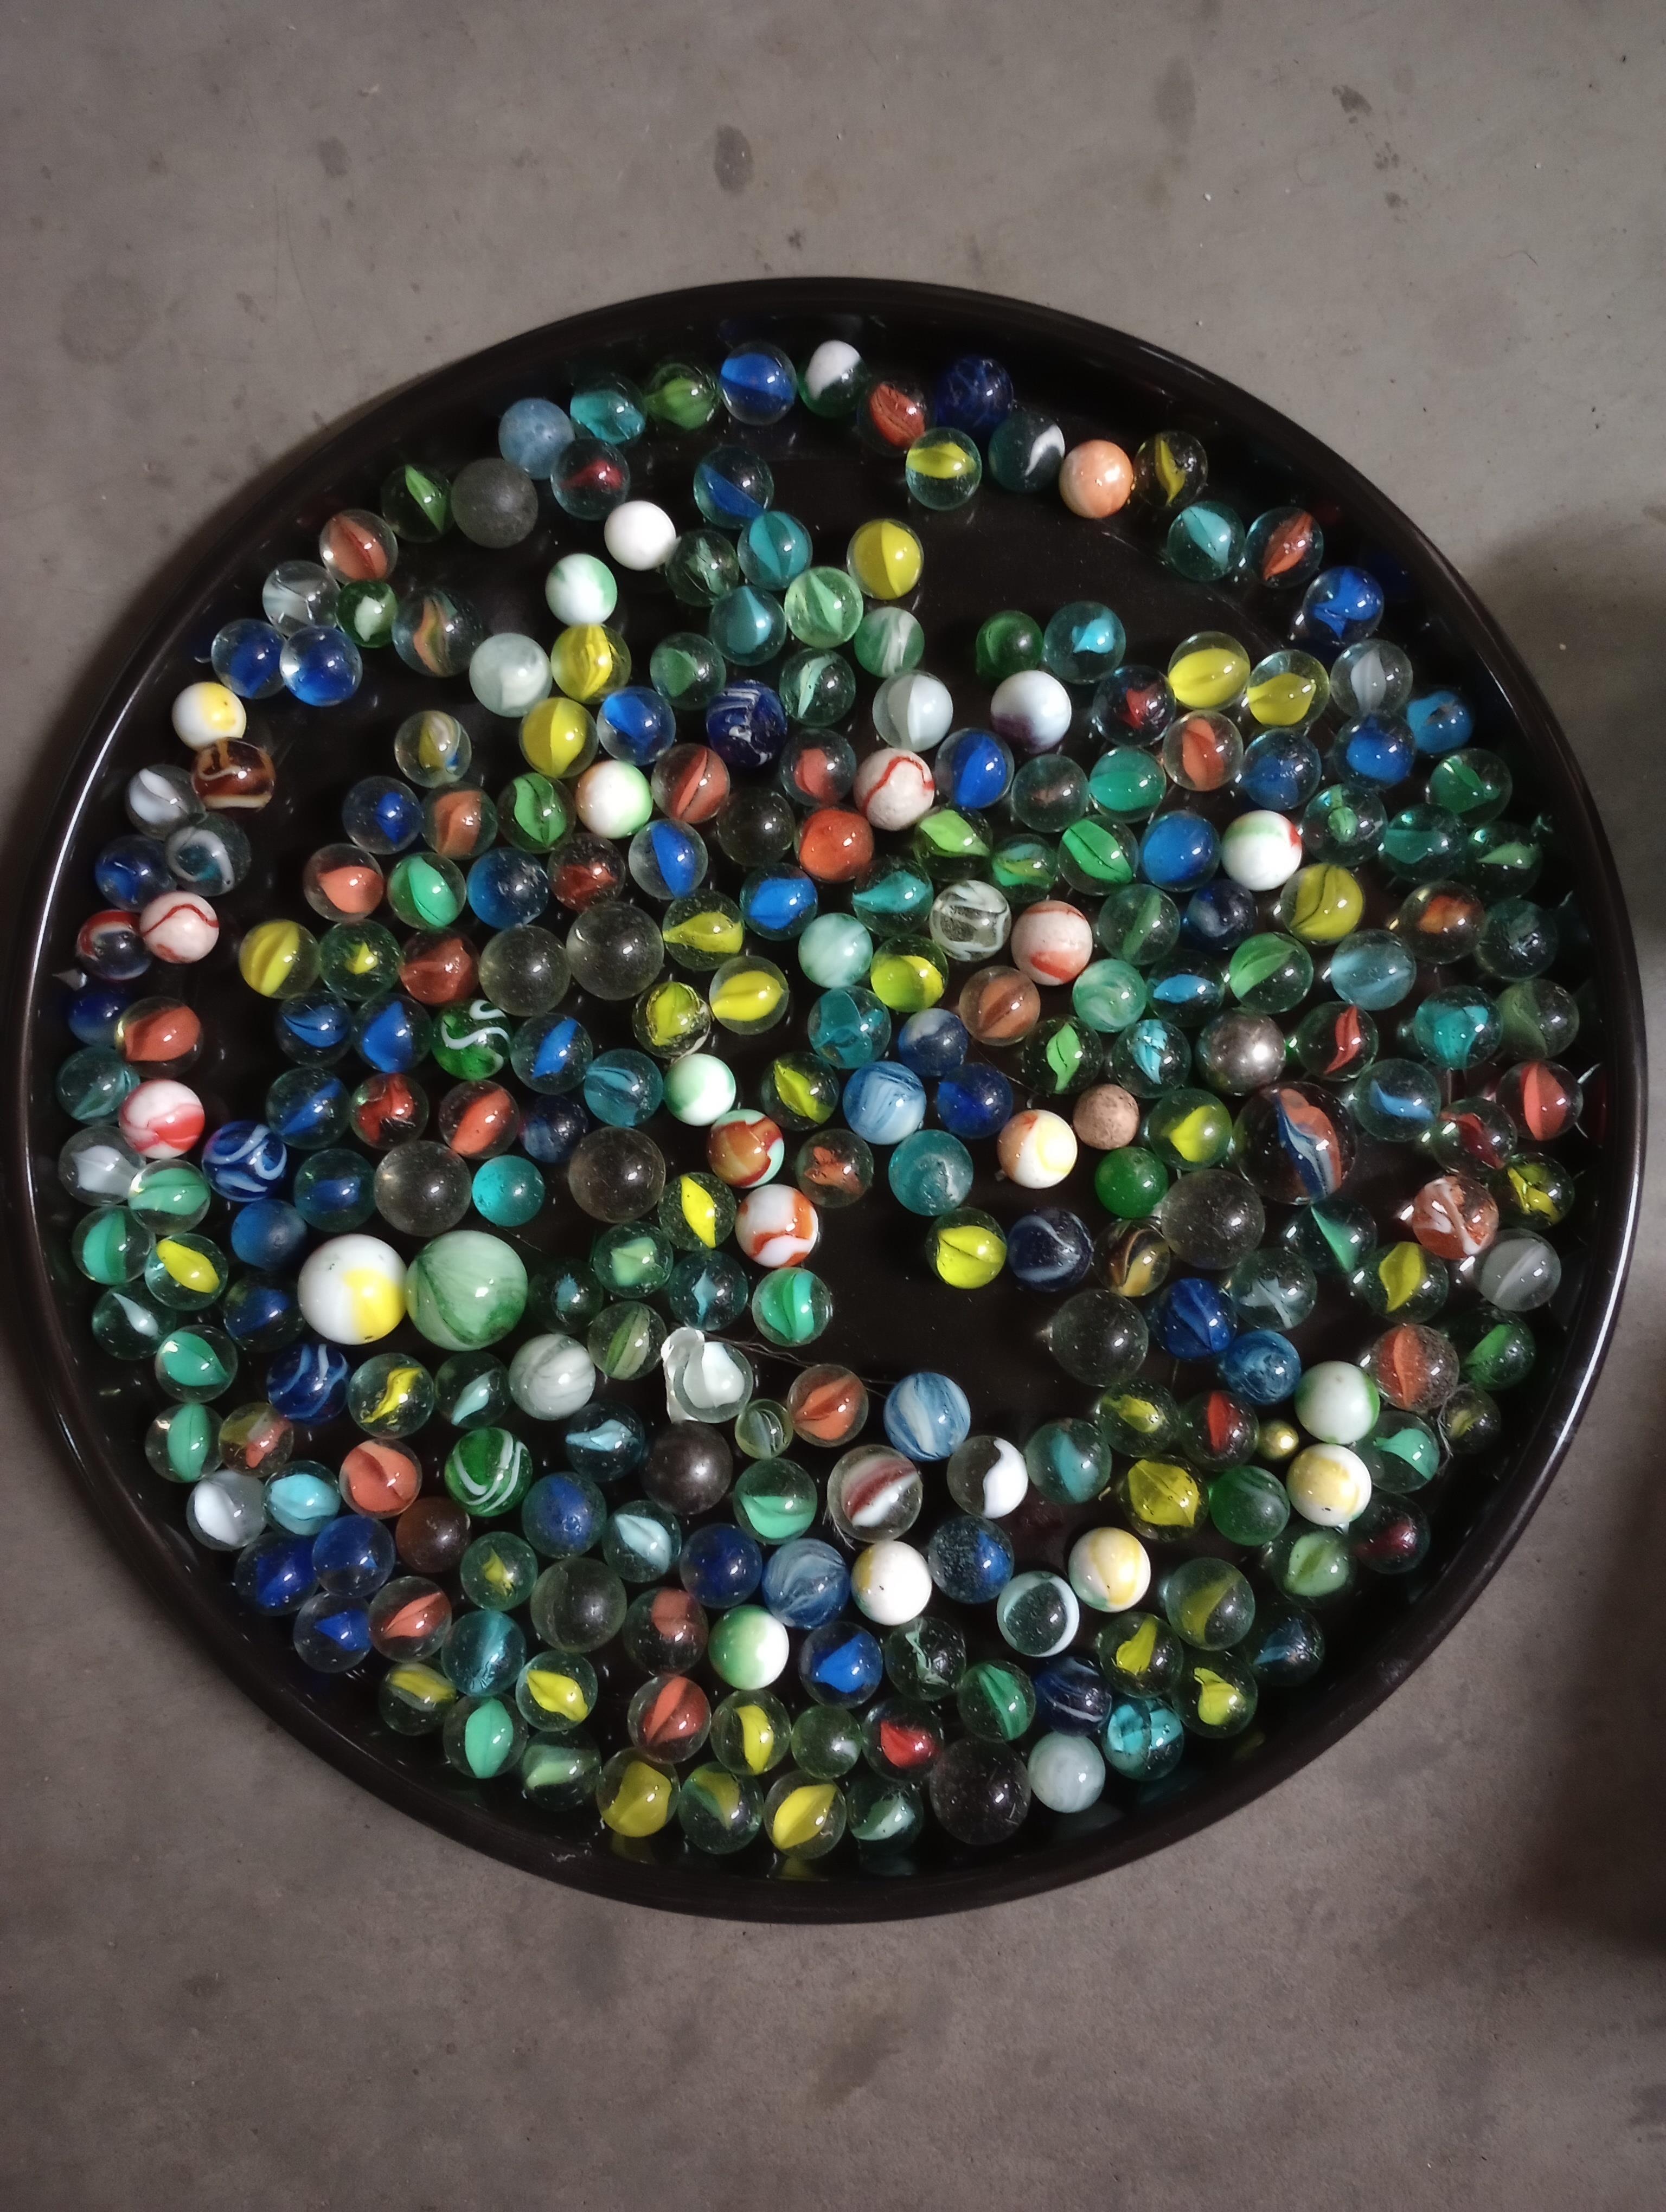 A quantity of marbles and baking beans. - Image 2 of 2